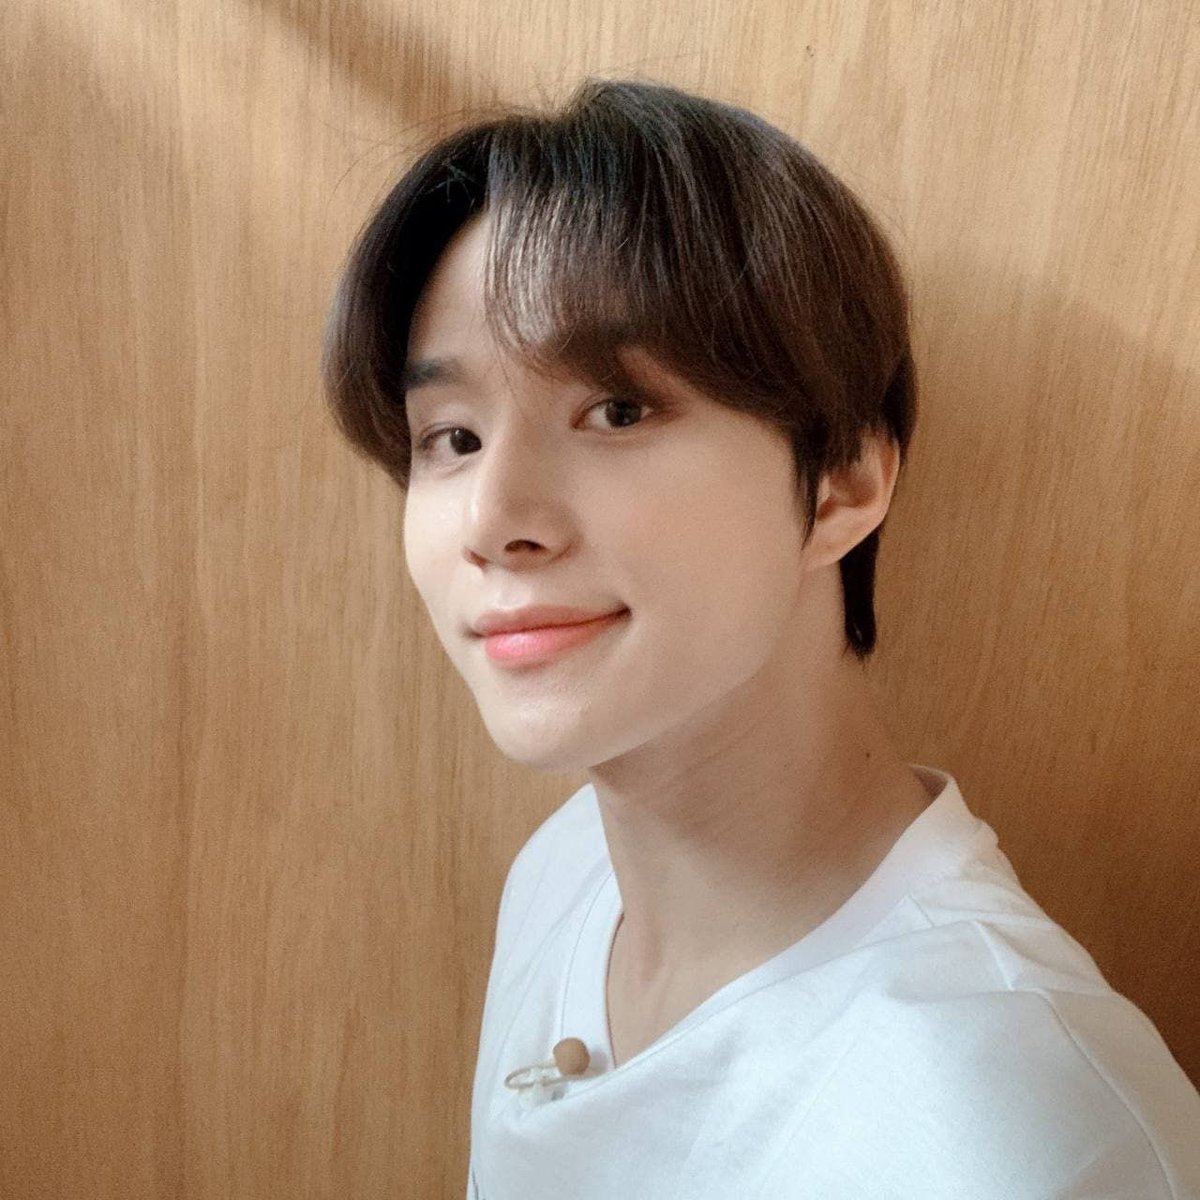 RT @JUNGWOOPOST: jungwoo bubble update, 
i know you're handsome mr kim.. https://t.co/NoZLuBJPg3